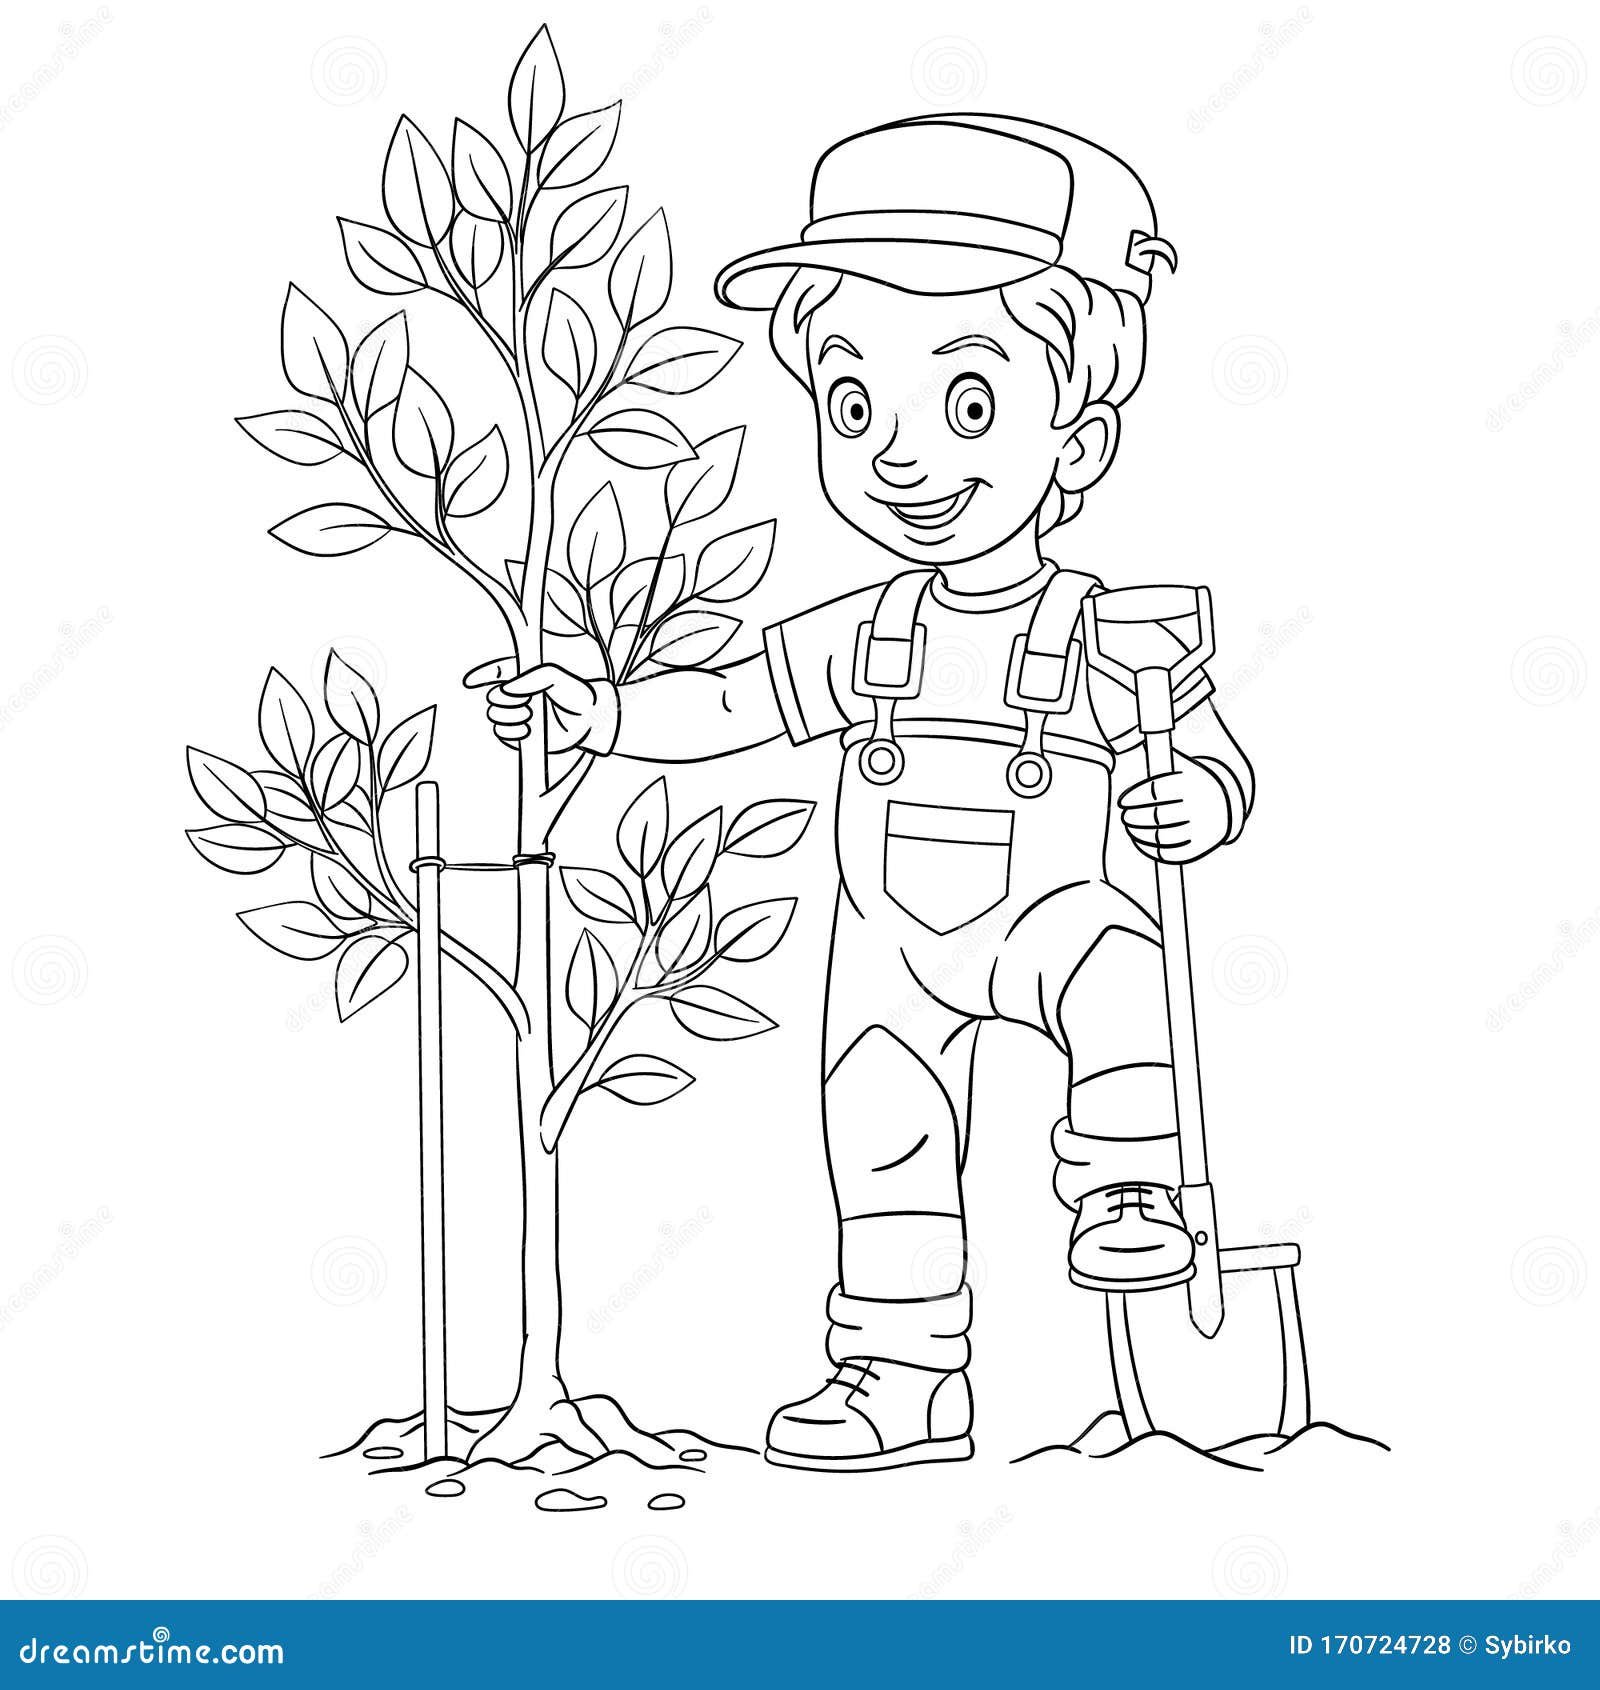 Coloring Page Stock Illustrations – 20,20 Coloring Page Stock ...